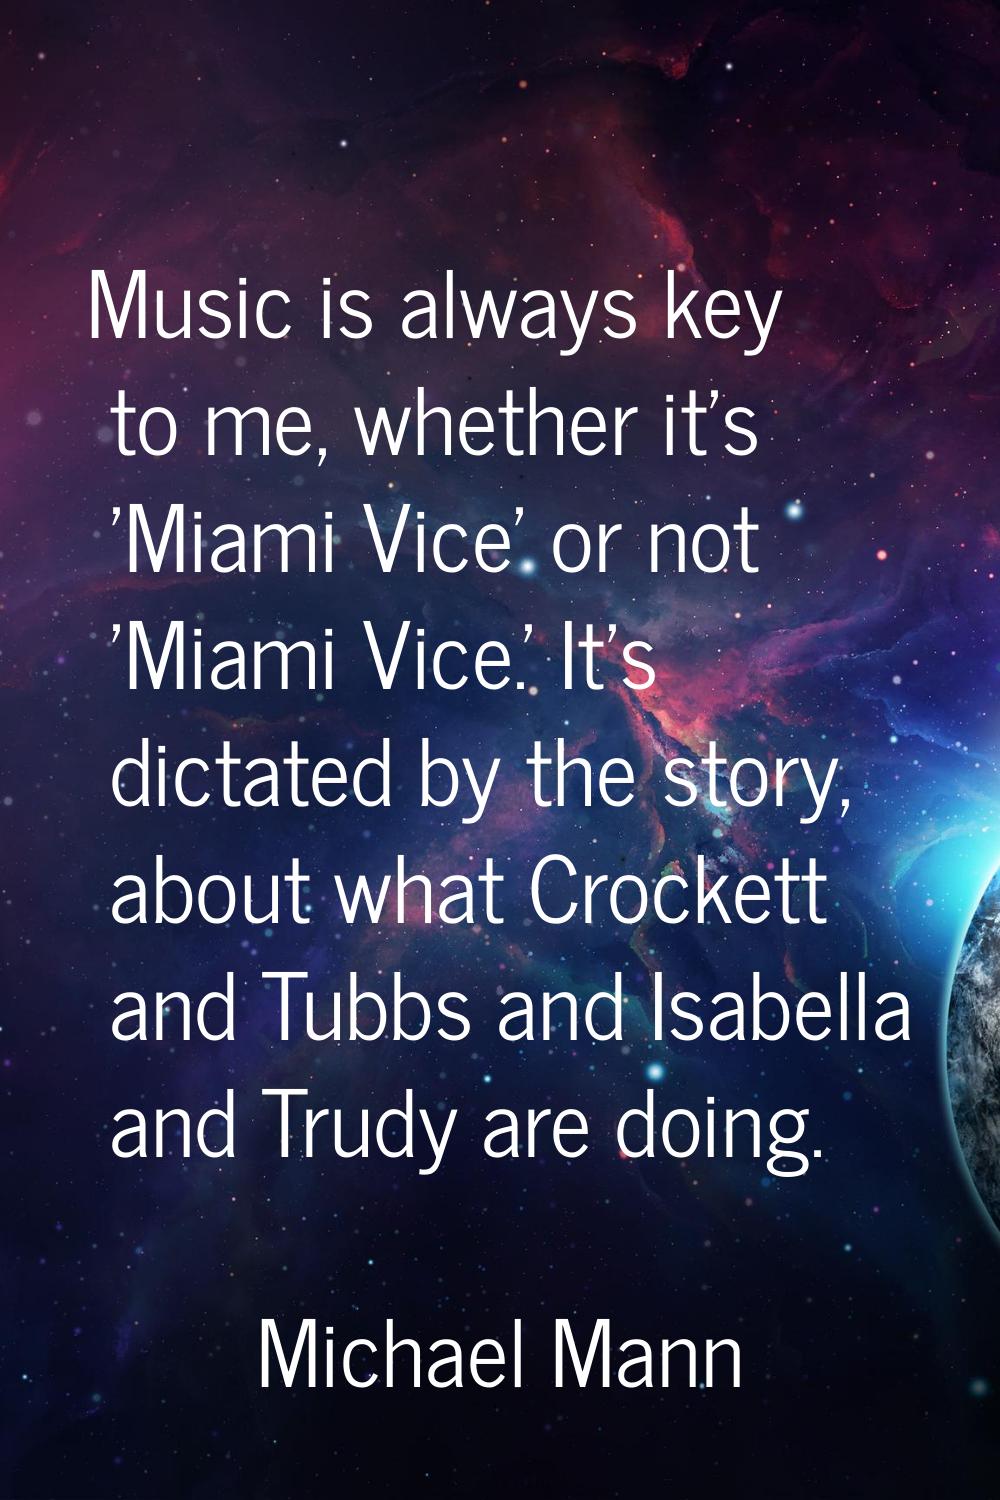 Music is always key to me, whether it's 'Miami Vice' or not 'Miami Vice.' It's dictated by the stor